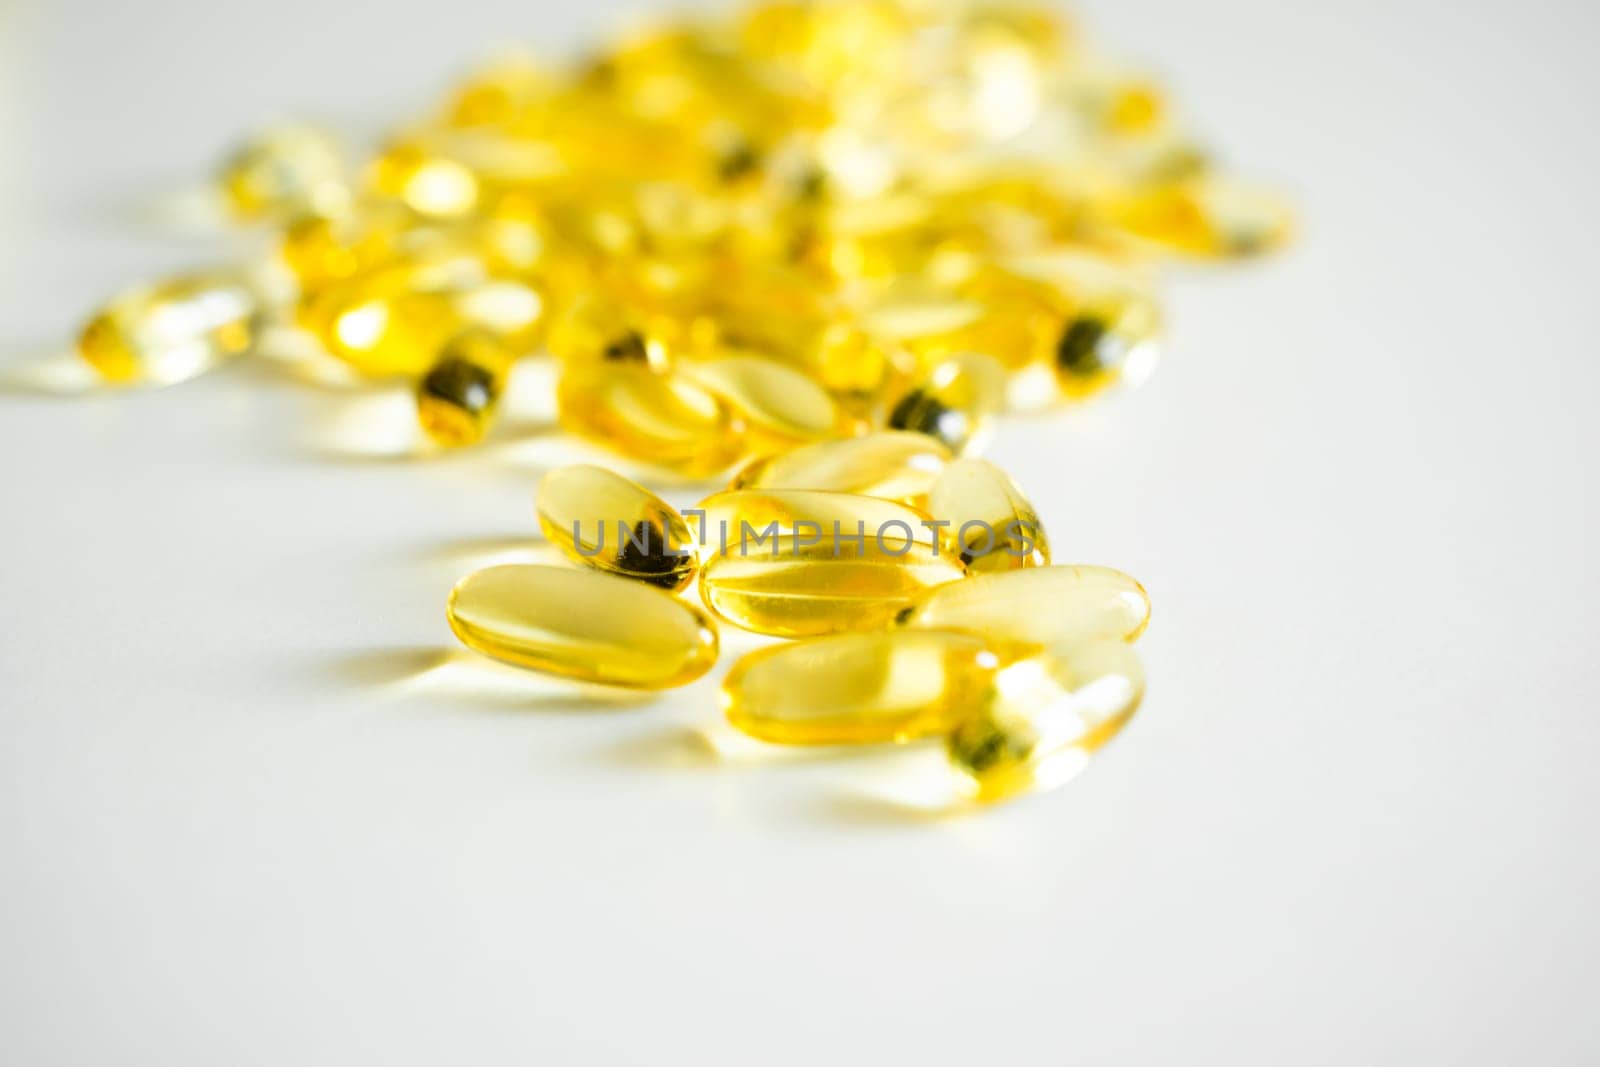 Capsules of Omega 3 on white background. Health care concept. Medical pill or vitamin's capsule pattern. Medicine, healthcare or pharmacy concept. by vovsht